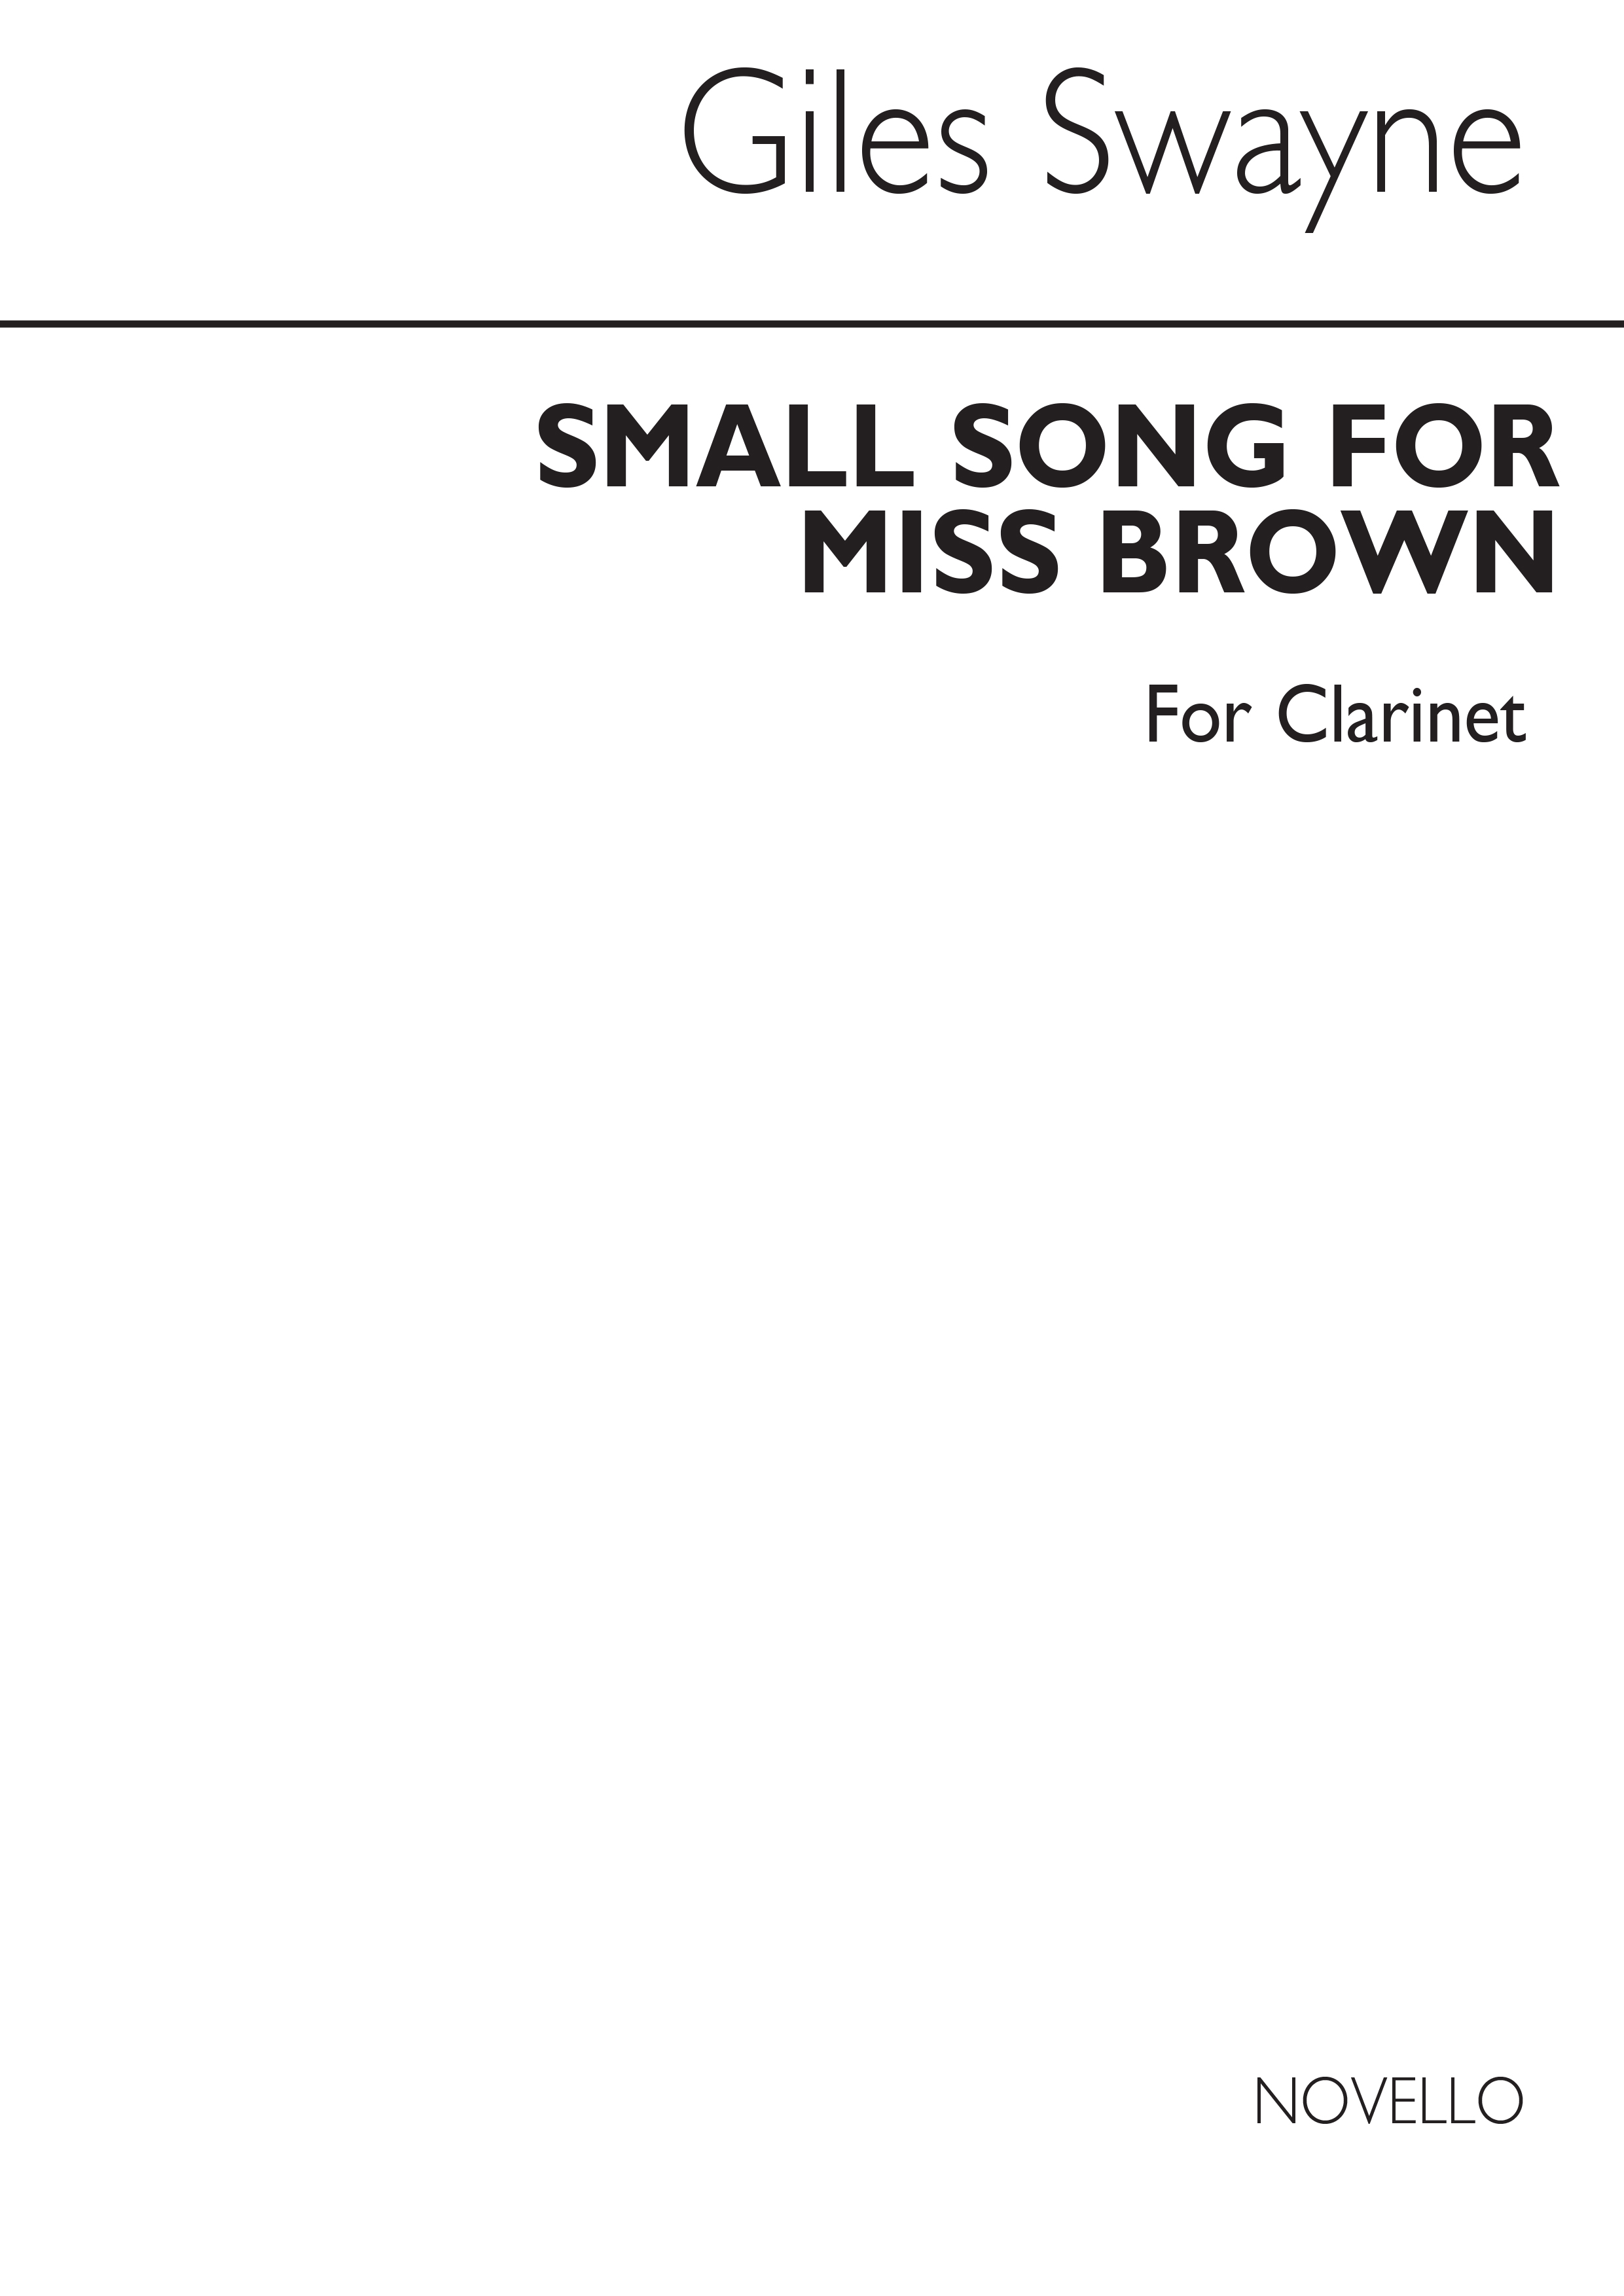 Giles Swayne: A Small Song For Miss Brown